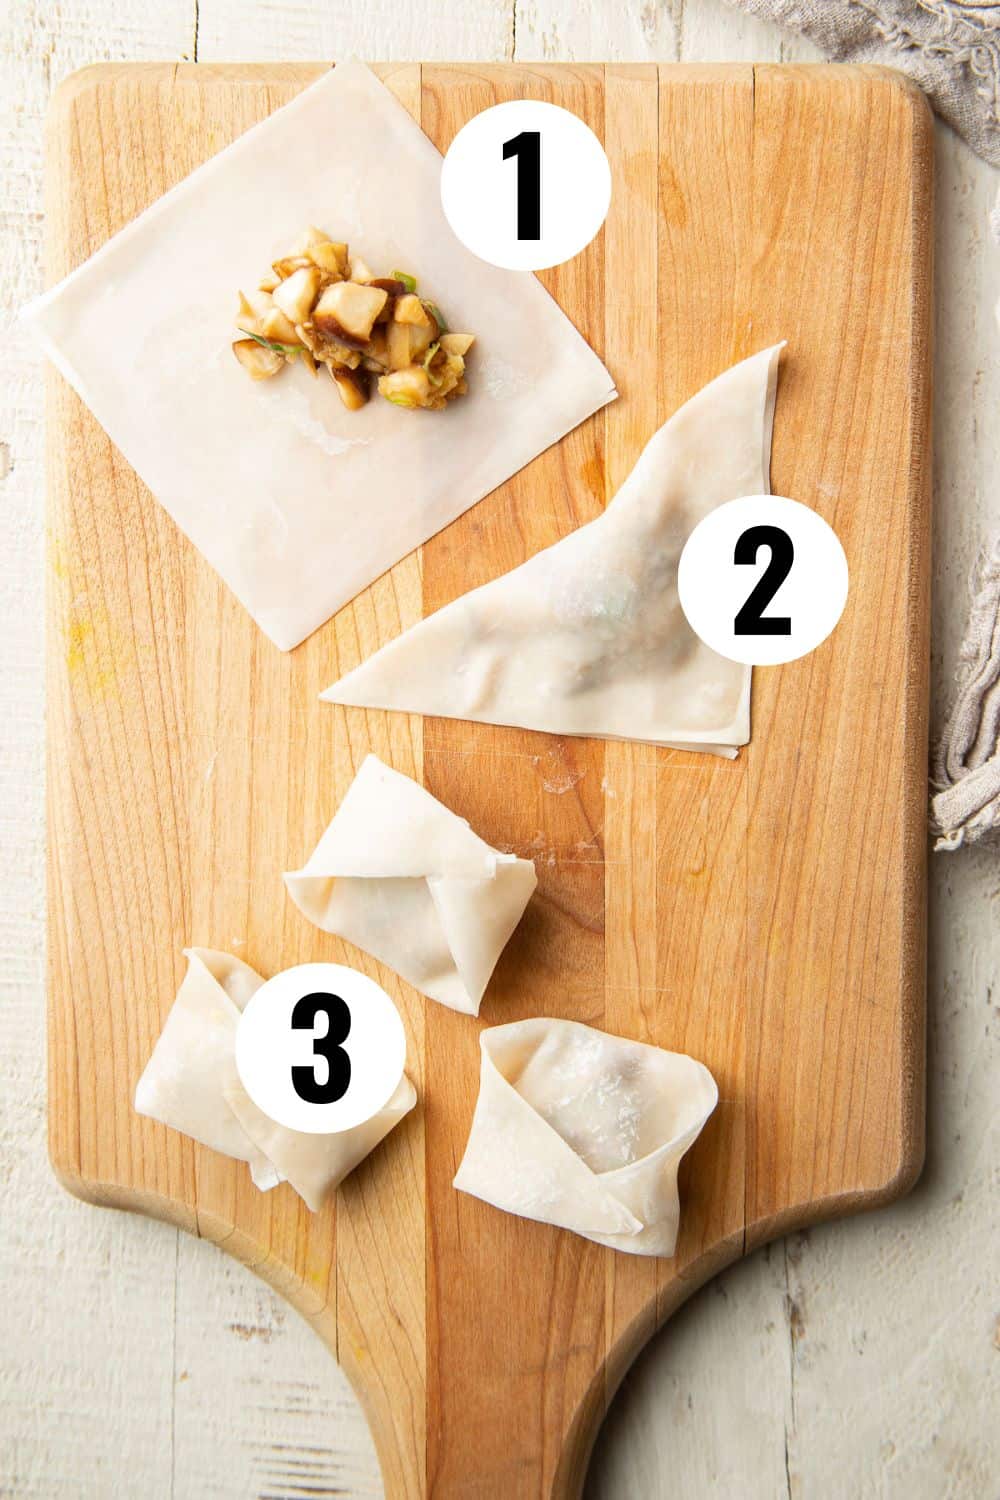 Graphic showing three numbered stages of shaping vegan wontons.